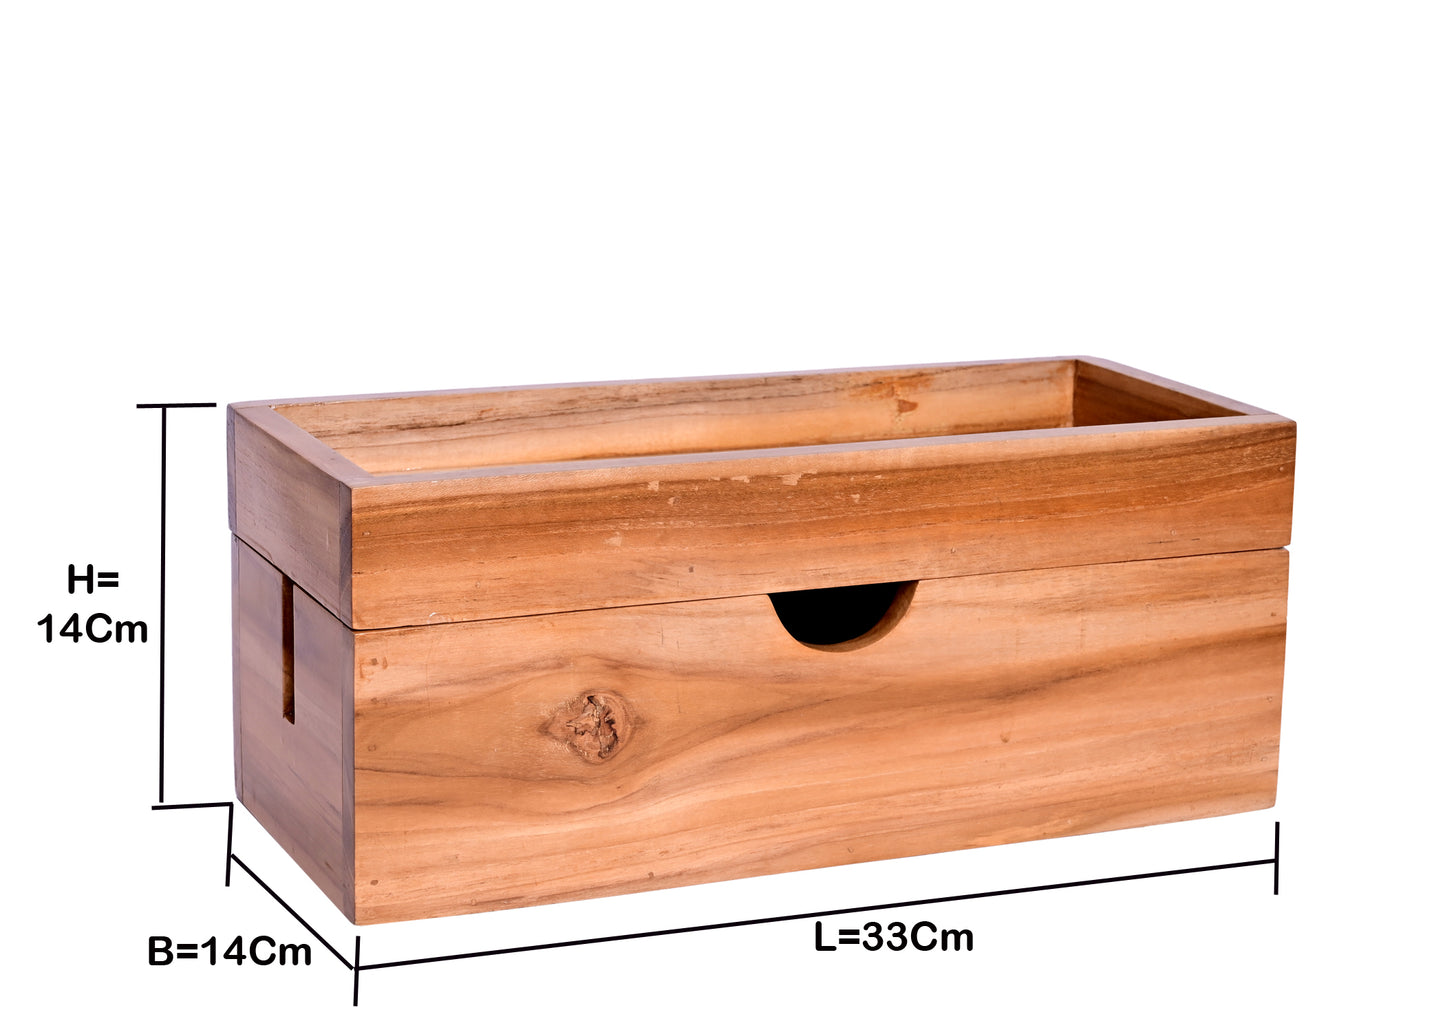 The Weaver's Nest Teak Wood Cord organizer/Desk Organizer for Mobile/Laptop/Device Chargers, Wires, USB Cables